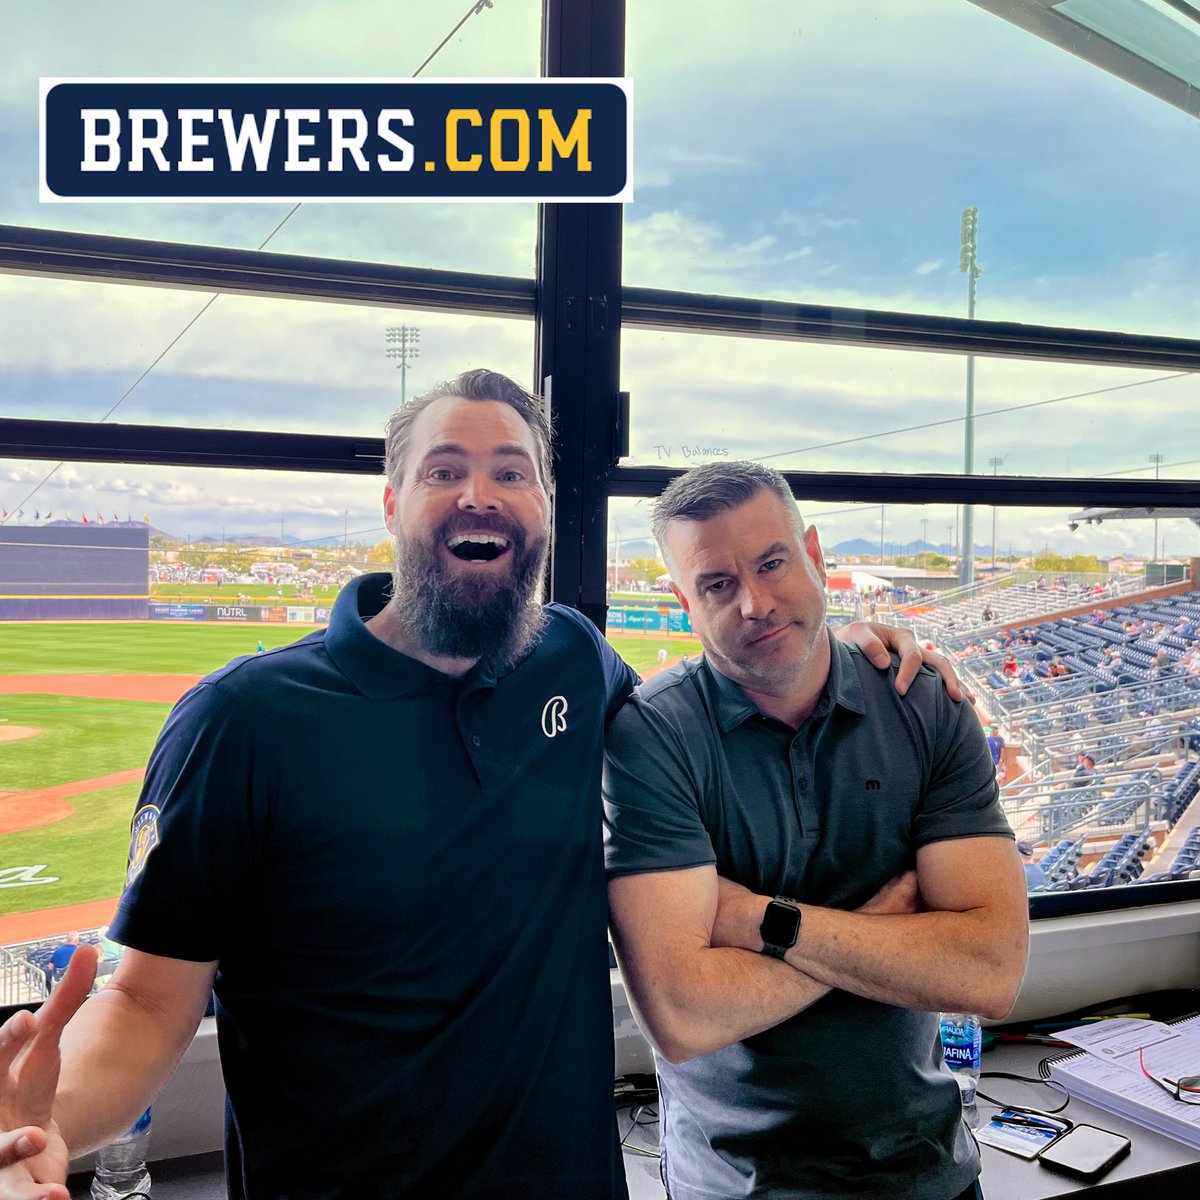 ⚾️BREWERS baseball coming up! @lanegrindle’s so excited I’m here! #ThisIsMyCrew | Brewers.com